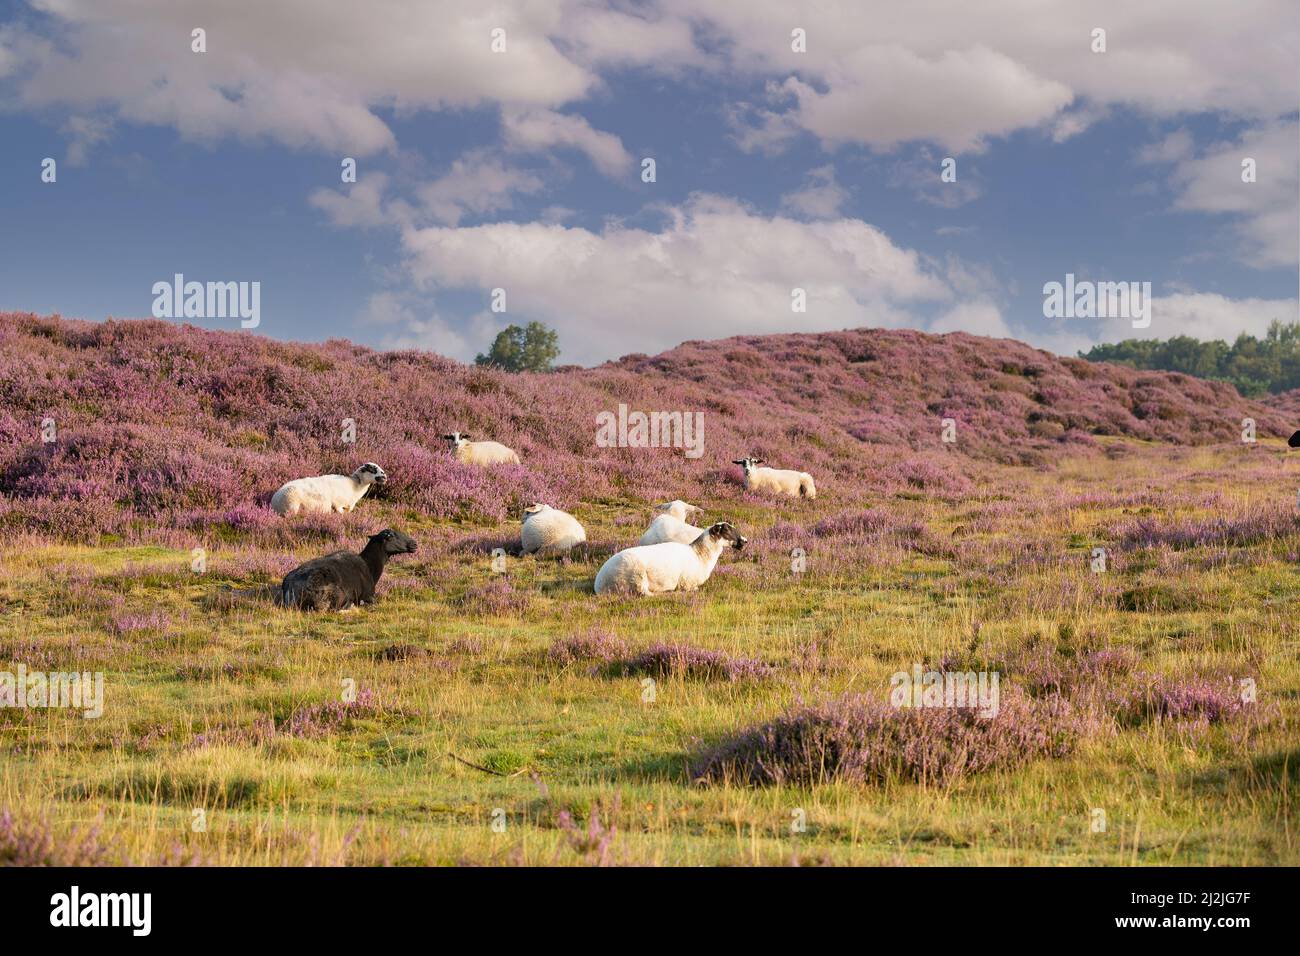 Landscape Gasterse Duinen near the village of Gasteren in the Dutch province of Drenthe with herd of sheep and fowering Heather plants, trees, grasses Stock Photo